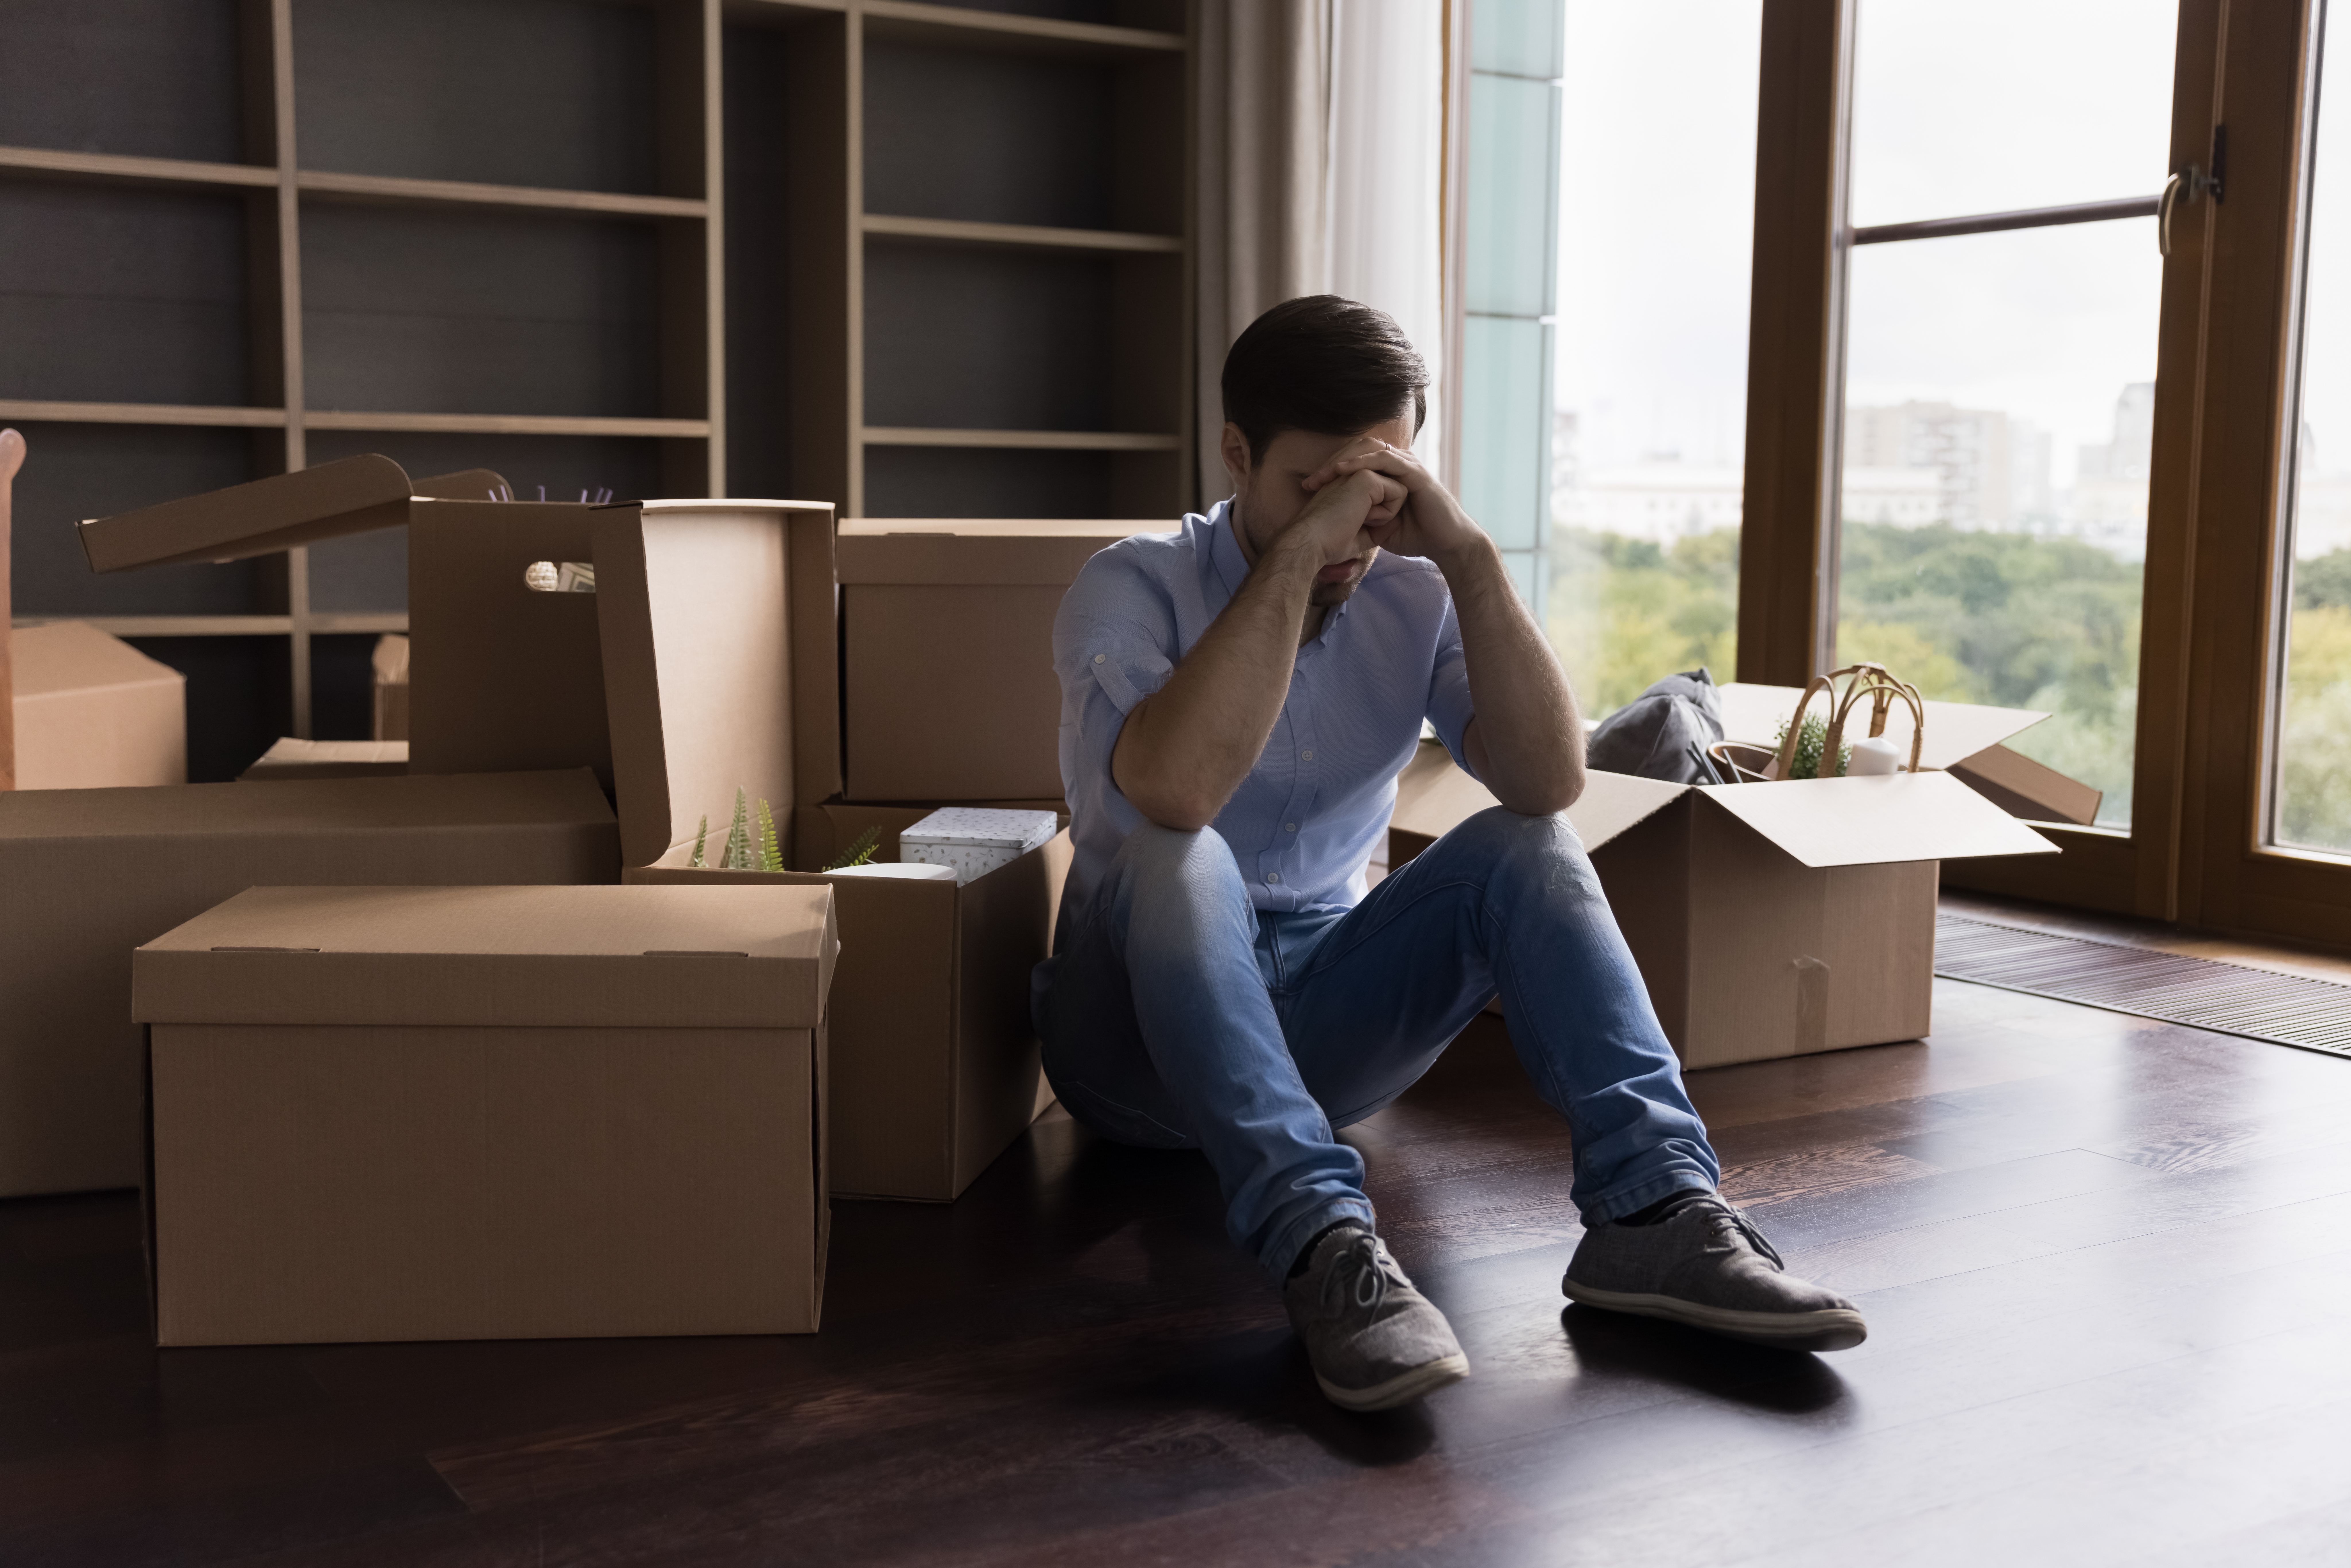 A young man sitting on the floor surrounded by moving boxes | Sources: Shutterstock